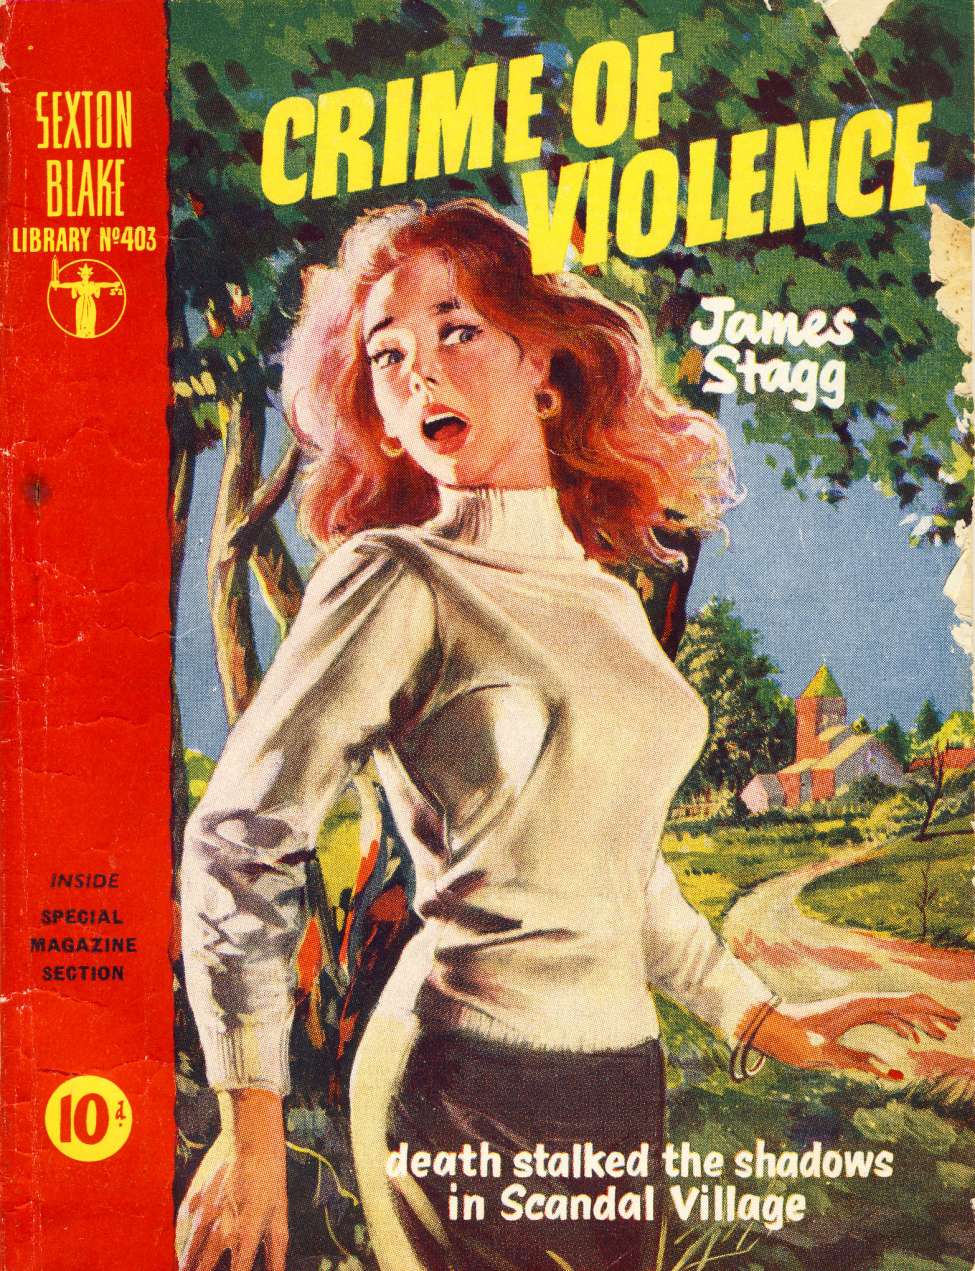 Book Cover For Sexton Blake Library S4 403 - Crime of Violence